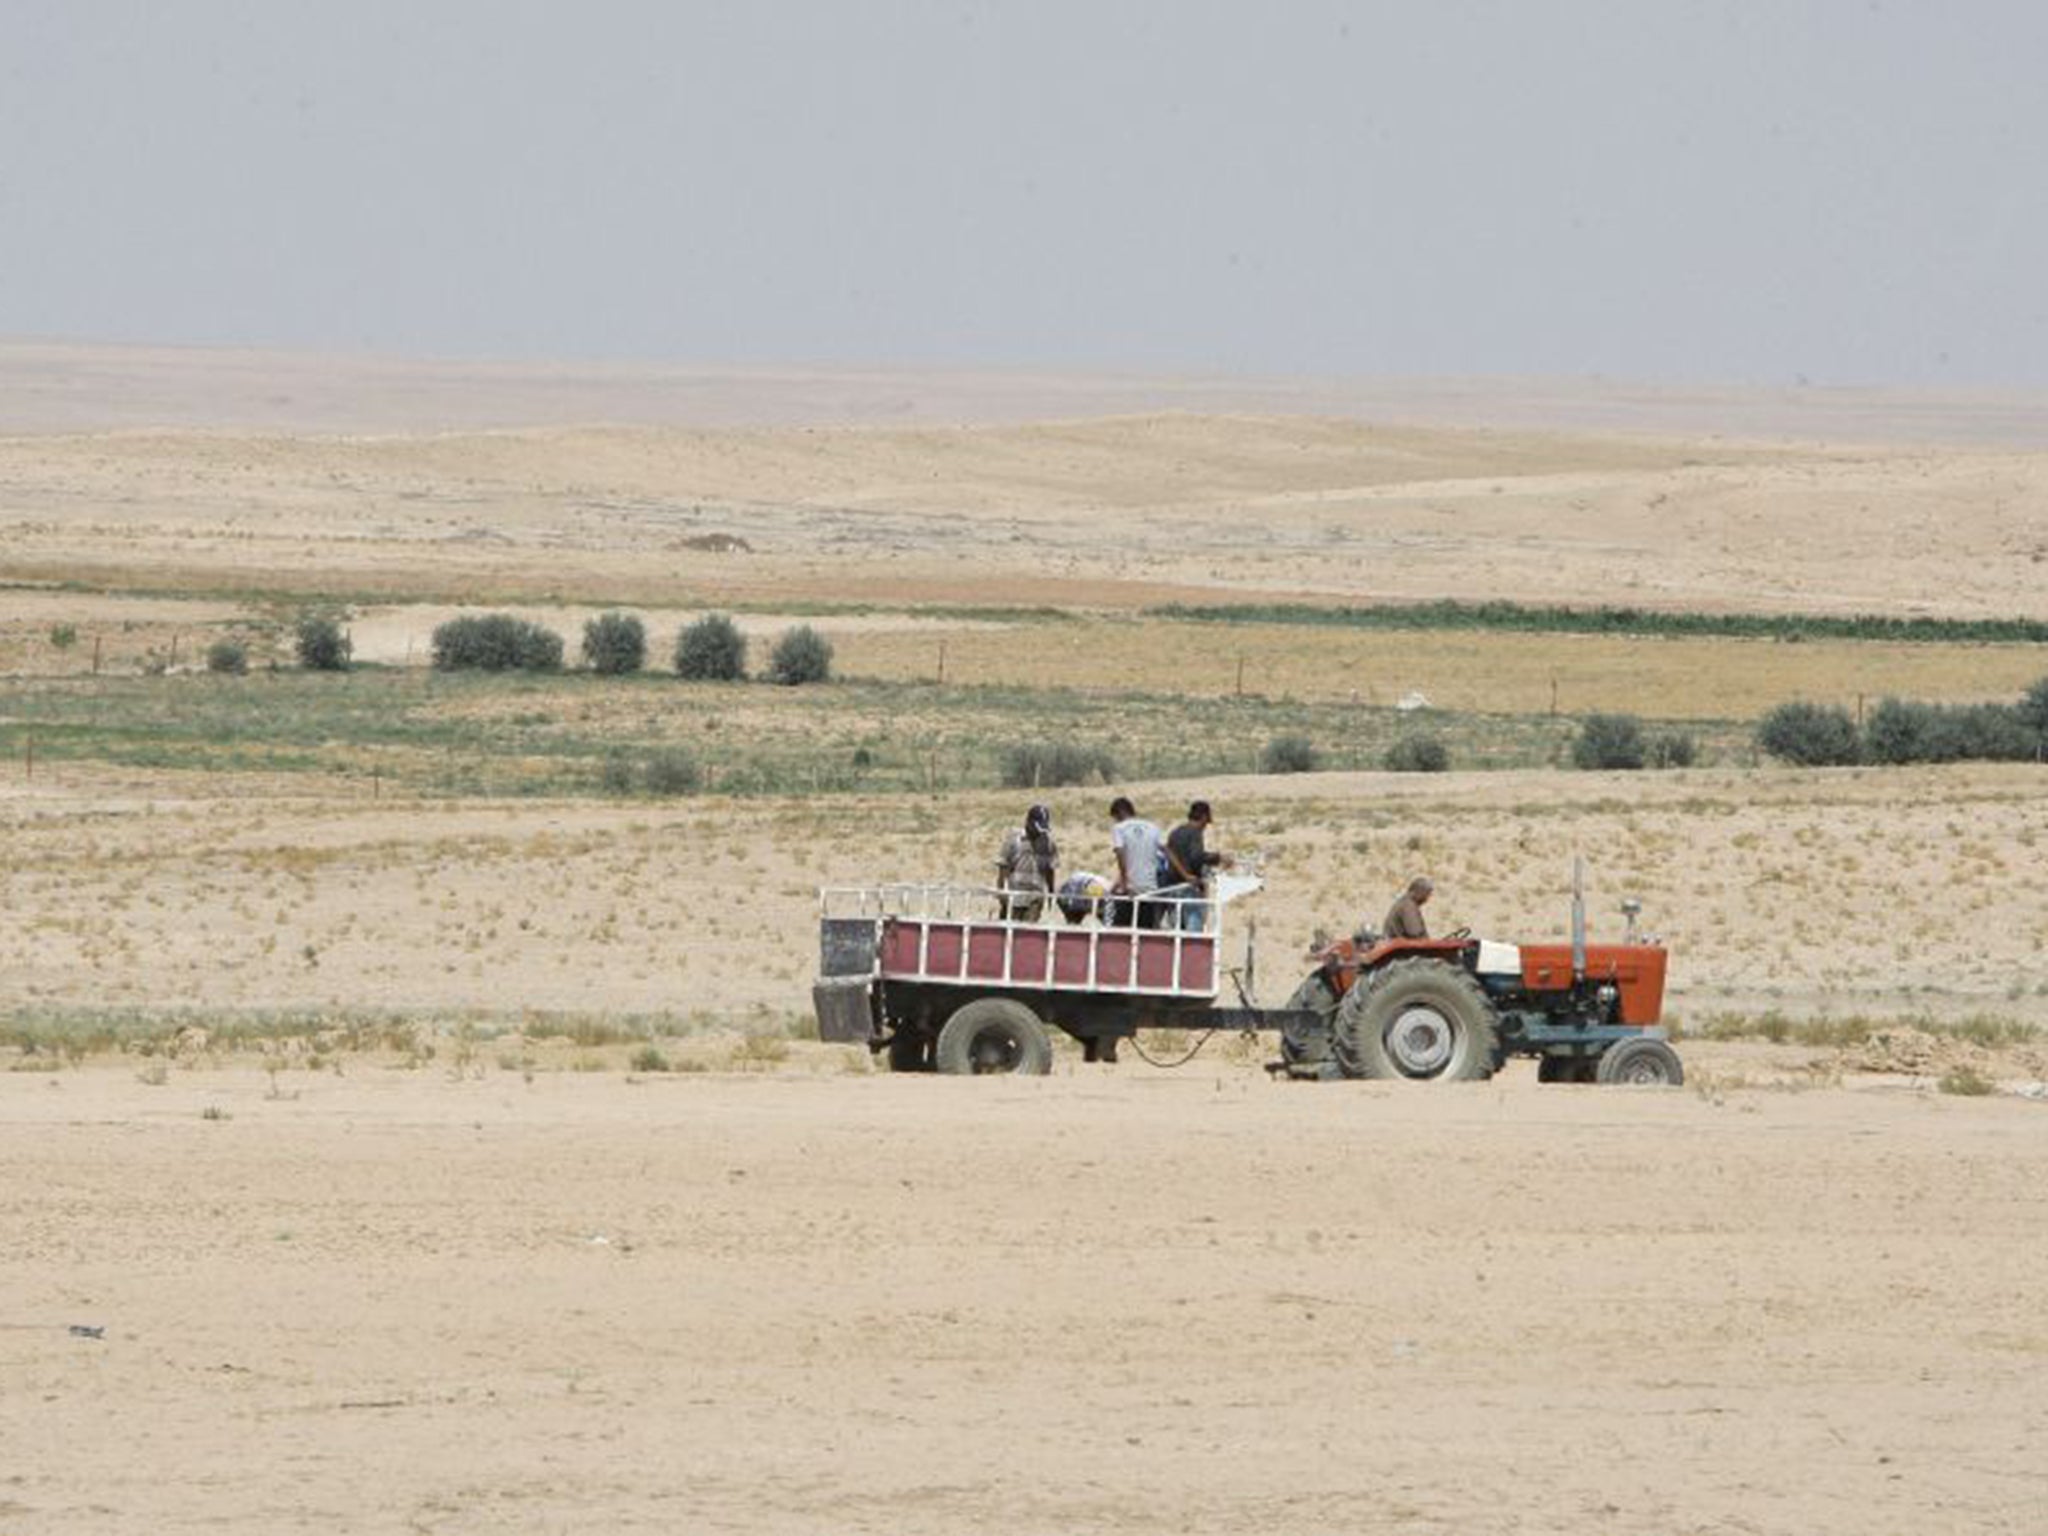 Farmers in Syria’s drought-hit Hasaka region. The UN is now giving food aid to almost 200,000 people 